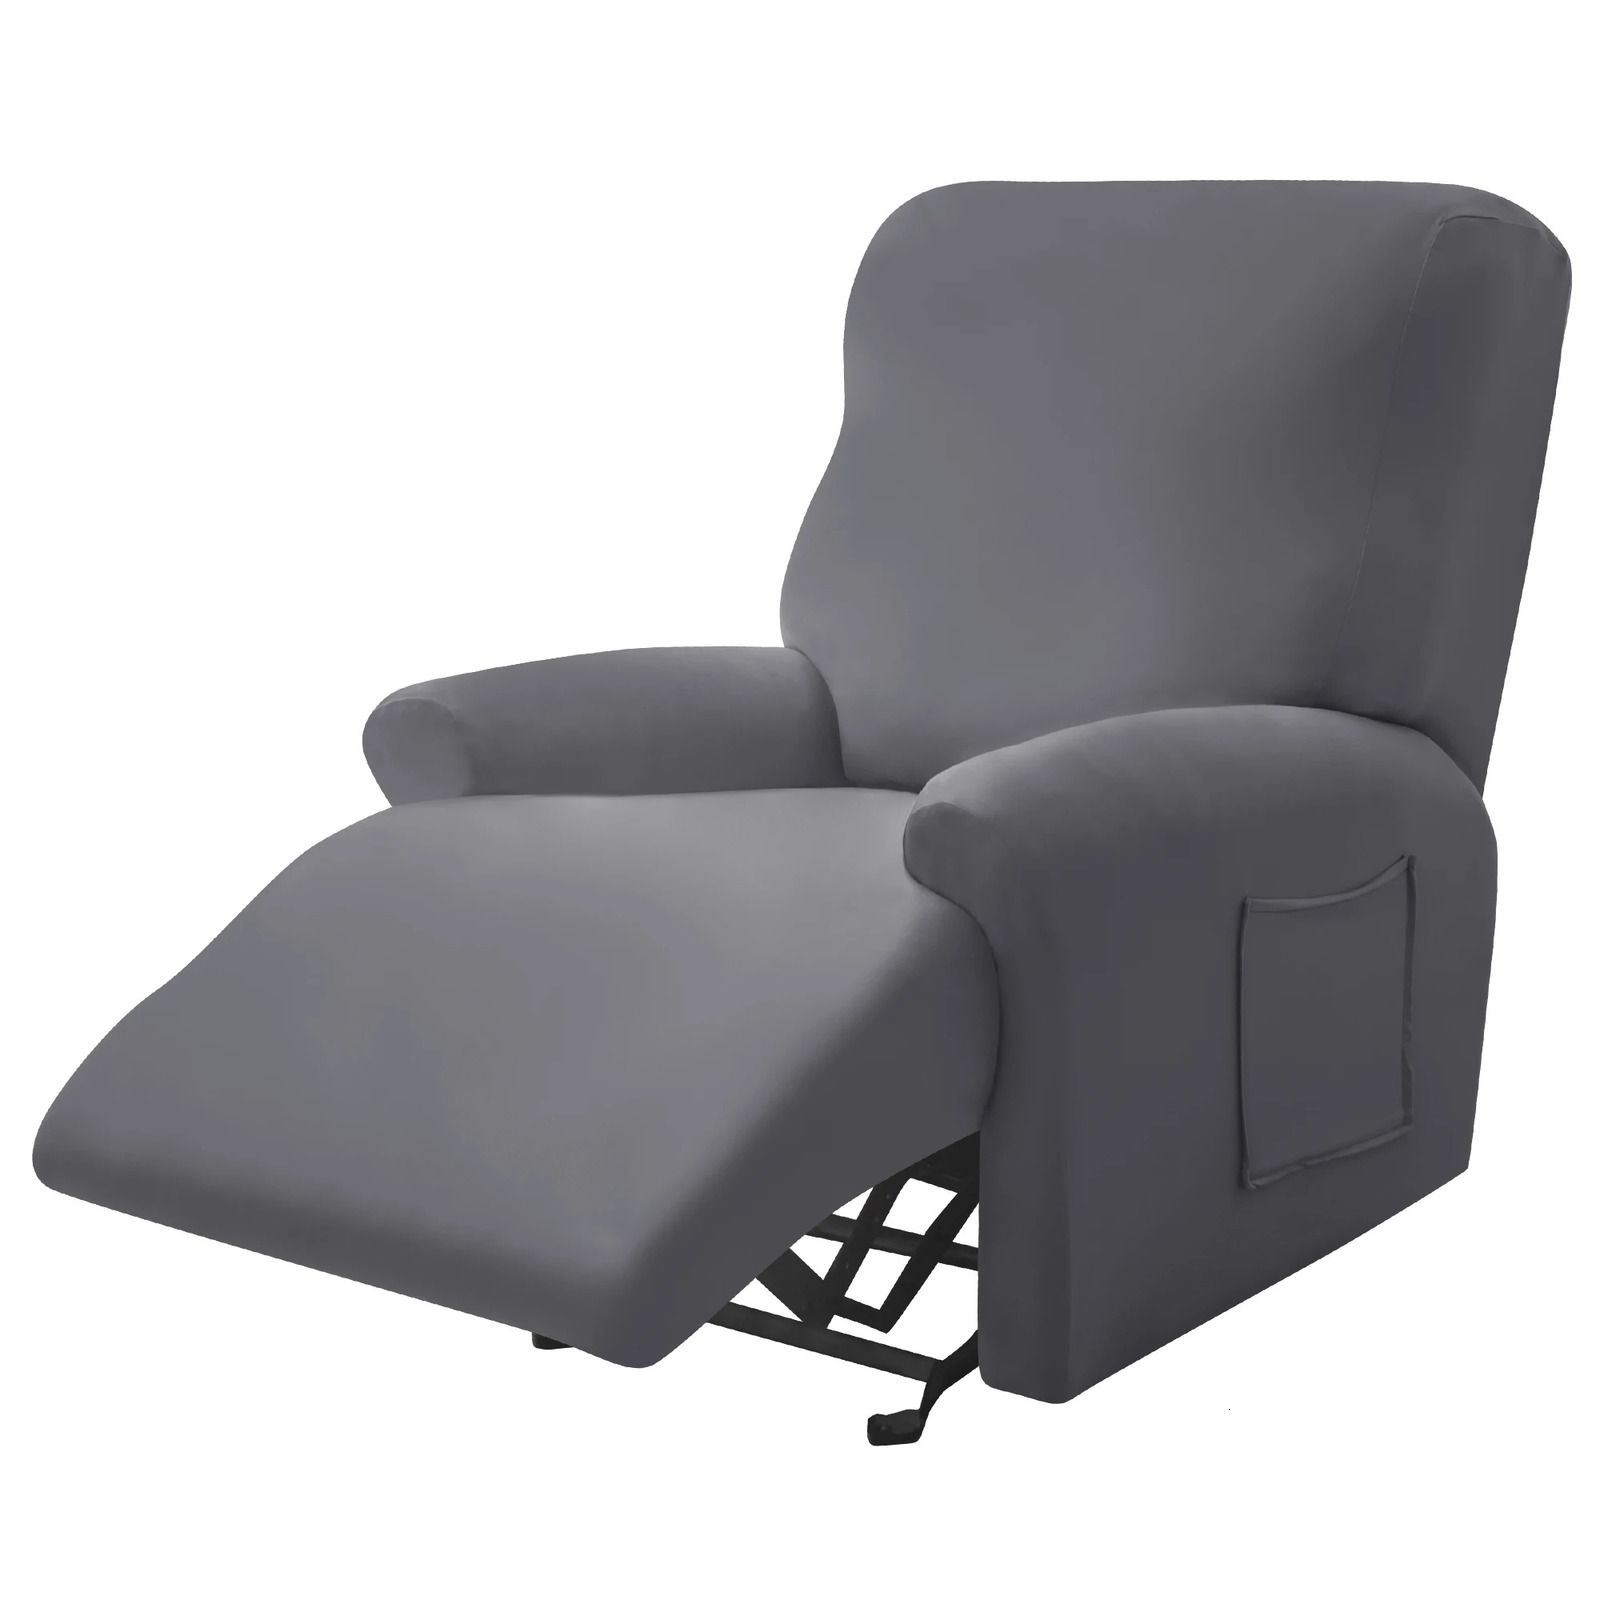 Middle Grey-1-Seater